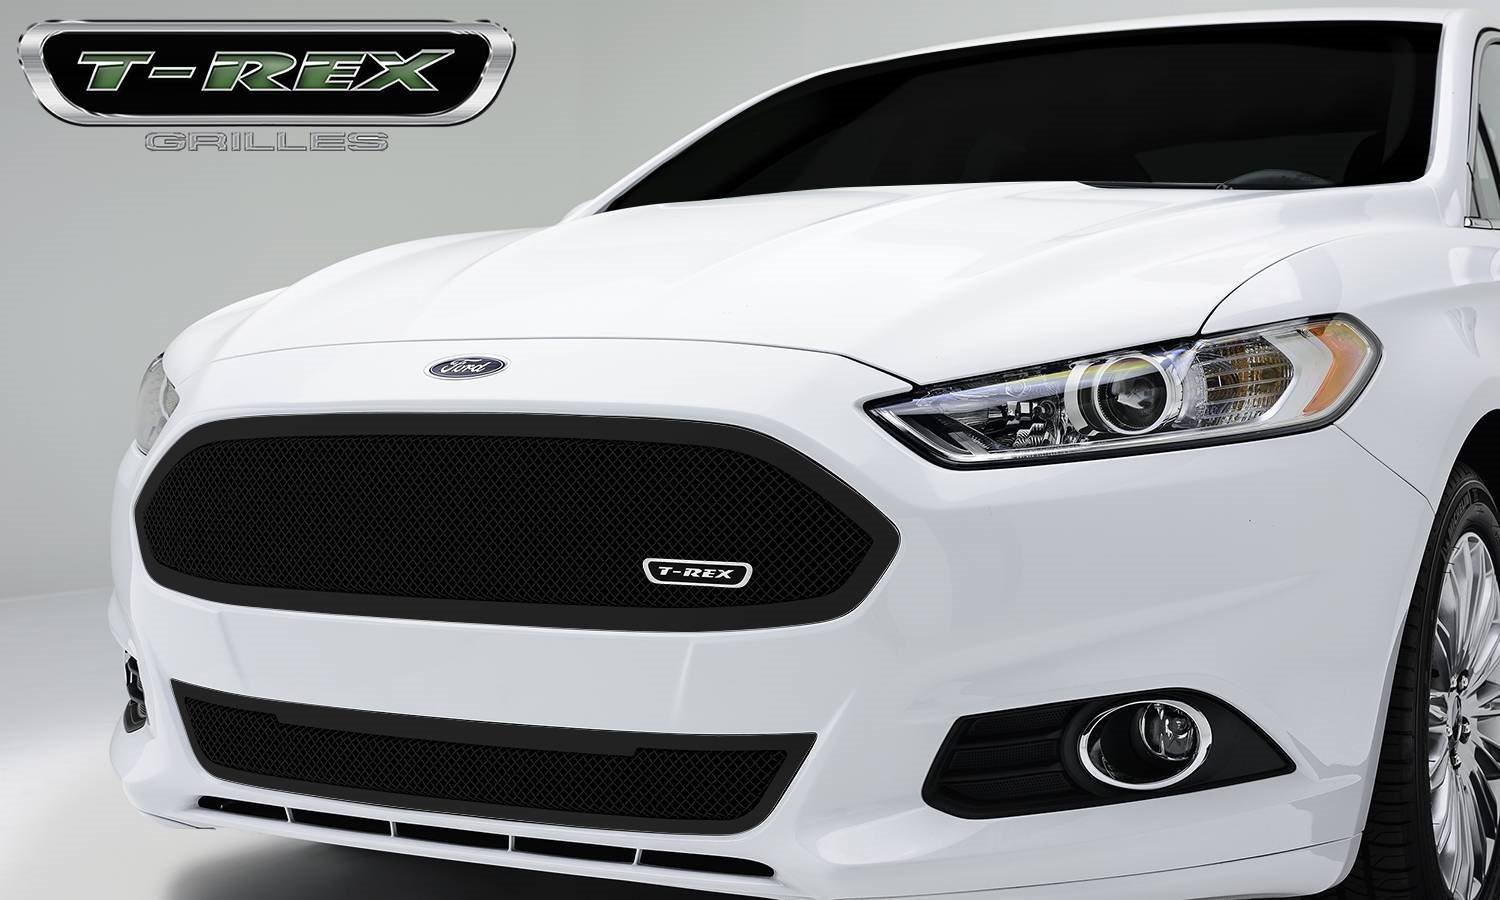 Upper Class Mesh Grille Insert 2013-2014 Ford Fusion